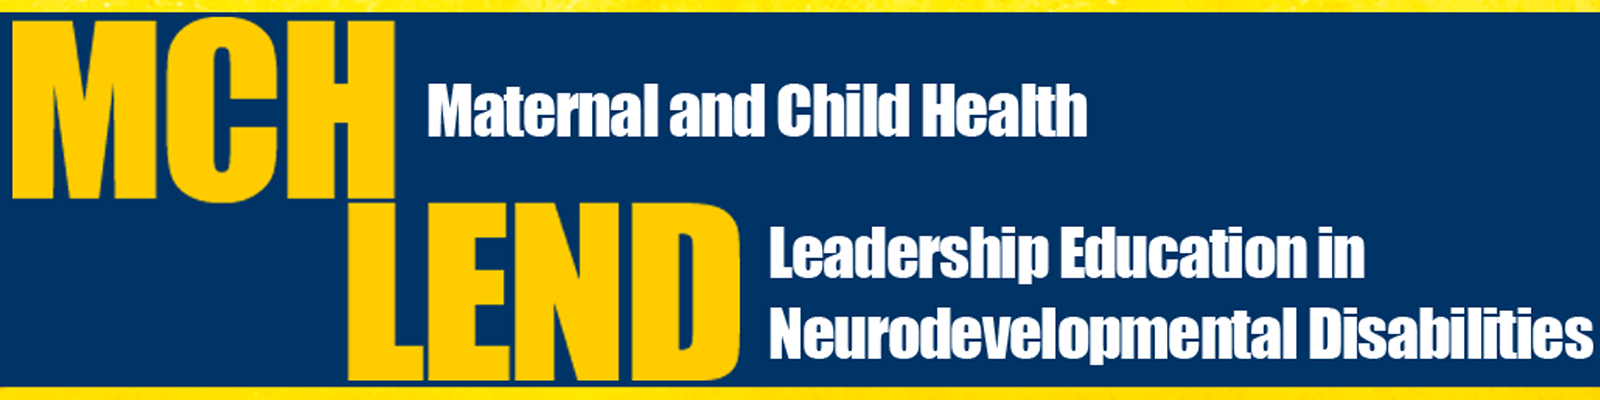 Maternal and Child Health in Leadership Education in Neurodevelopmental Disabilities